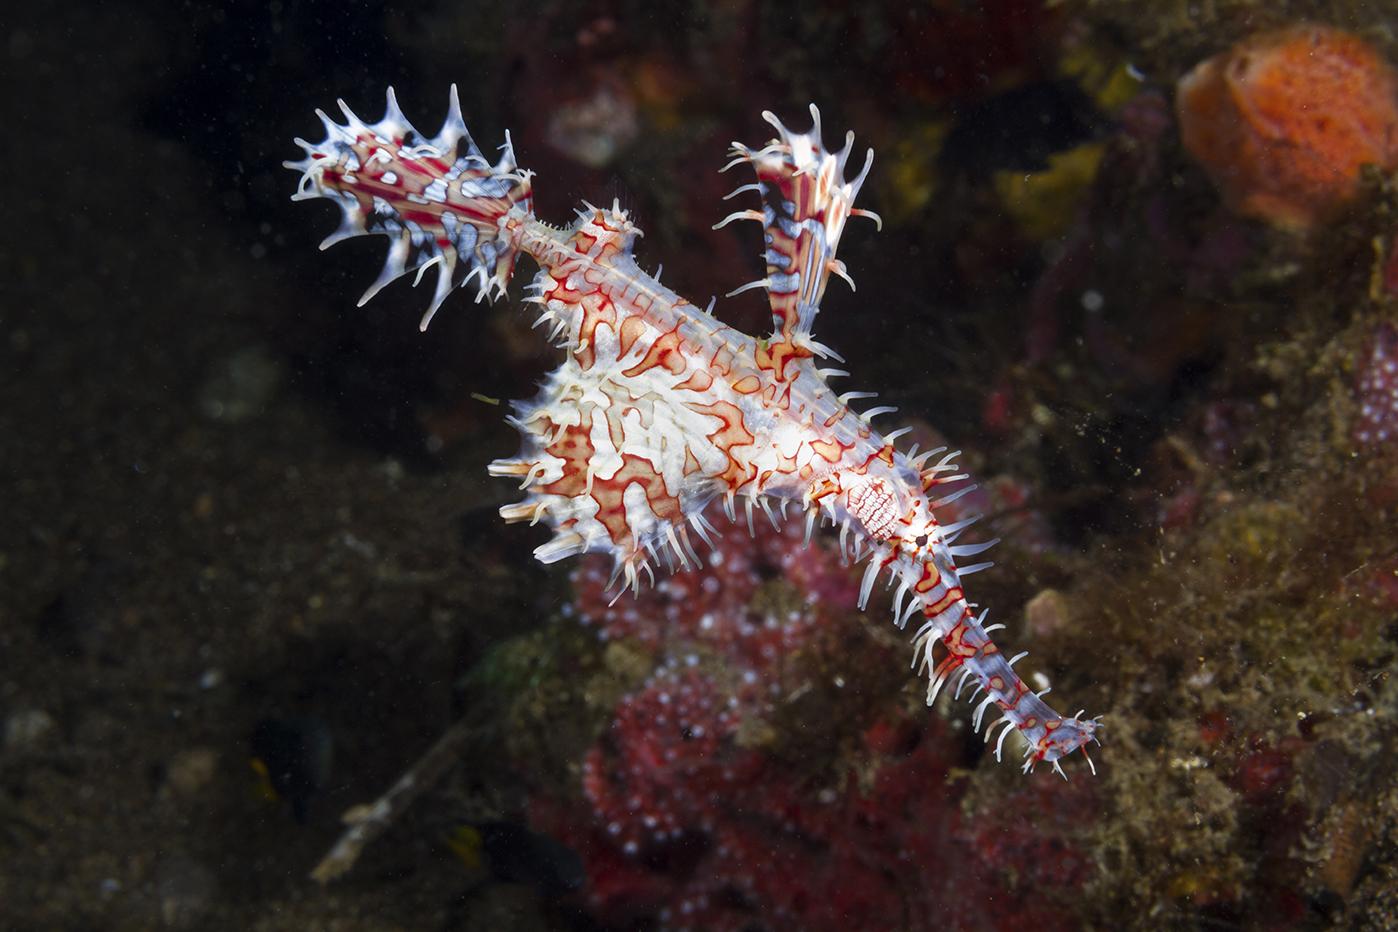 Ghost pipefish are experts at hiding in plain sight. They are equally adept at working with currents and eddies to hold position or drift inconspicuously as they remain motionless, waiting patiently for a meal to come within range. Photo by Walt Stearns